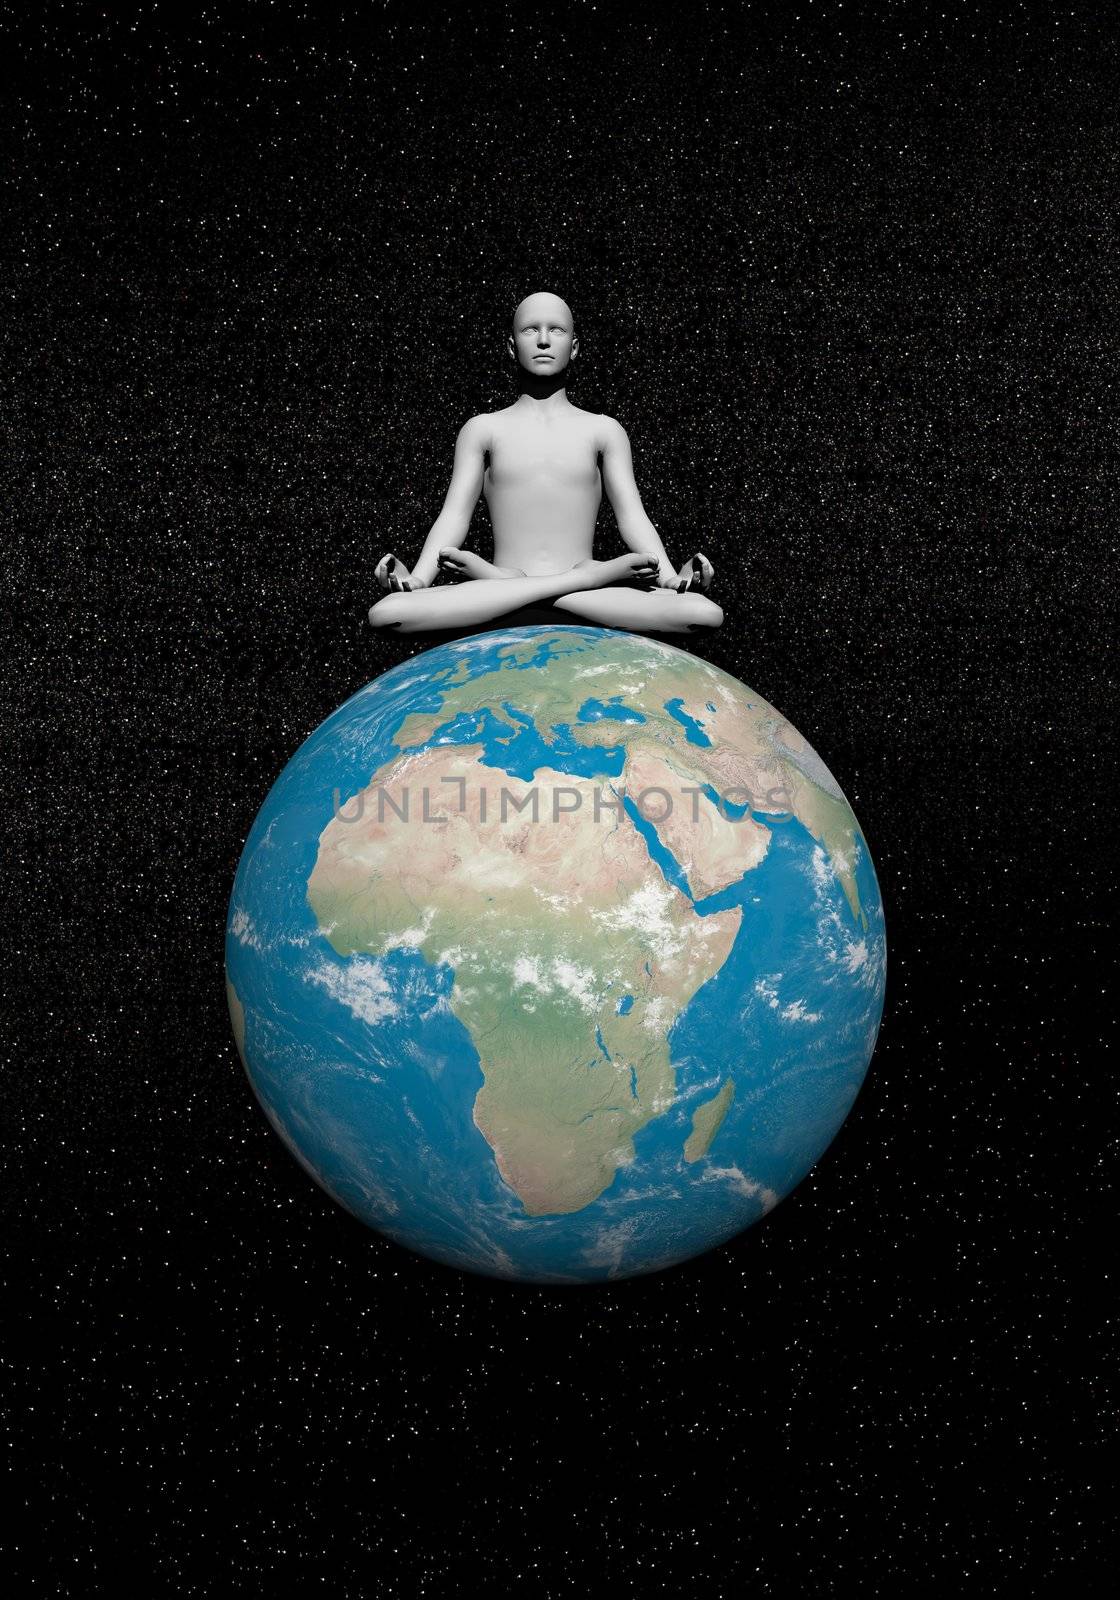 Human meditating quietly on the earth in universe background